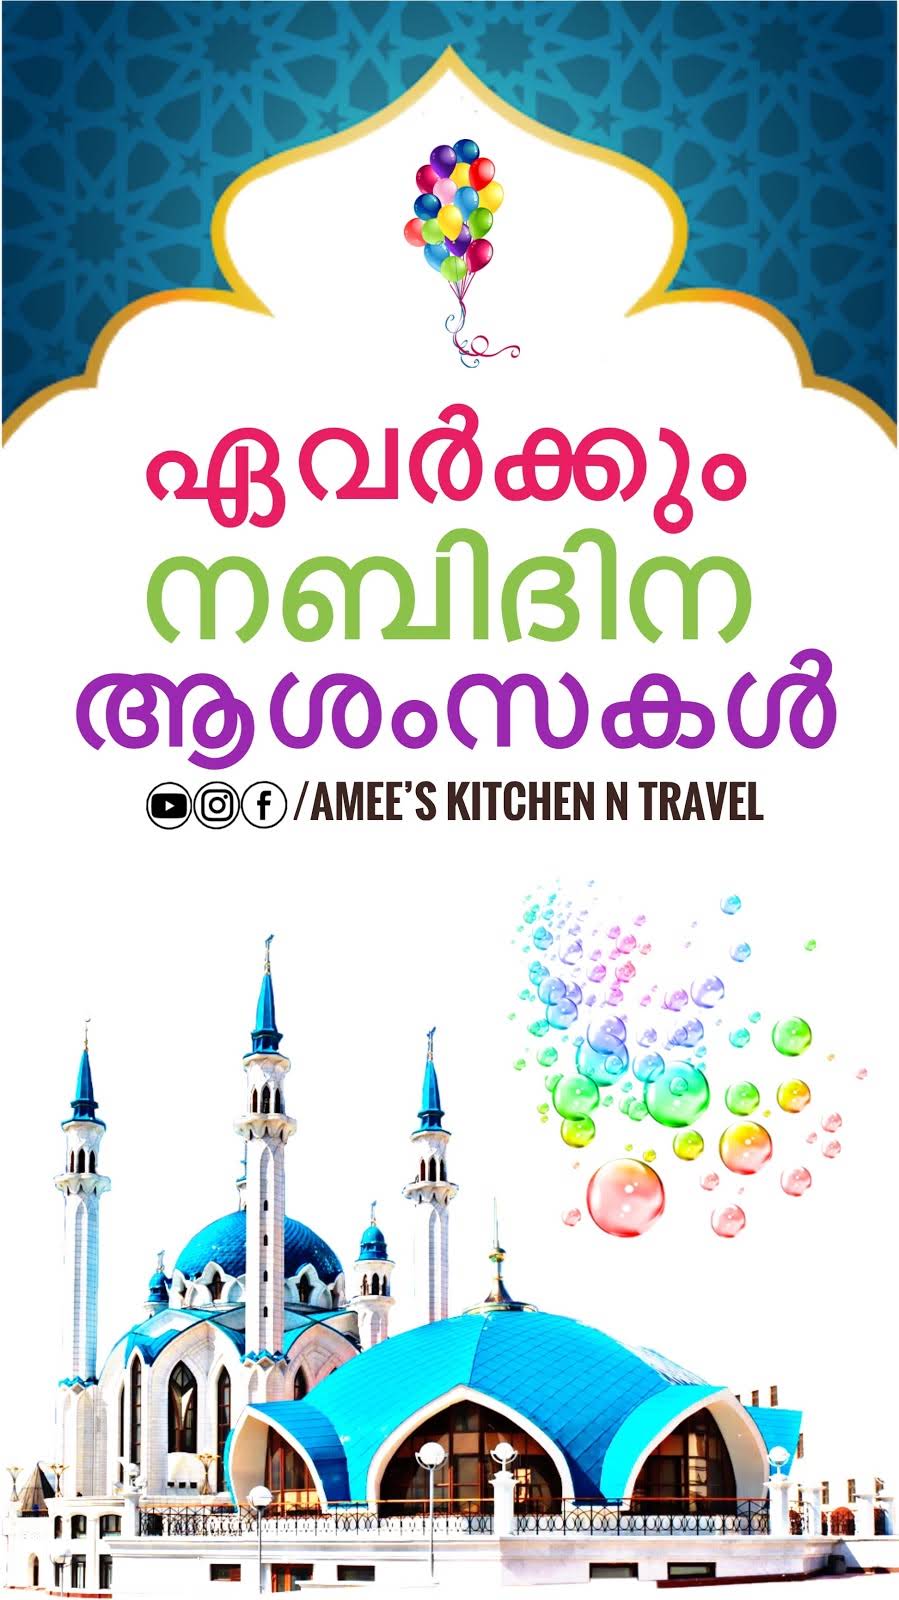 Amee's Kitchen N Travel - YouTube